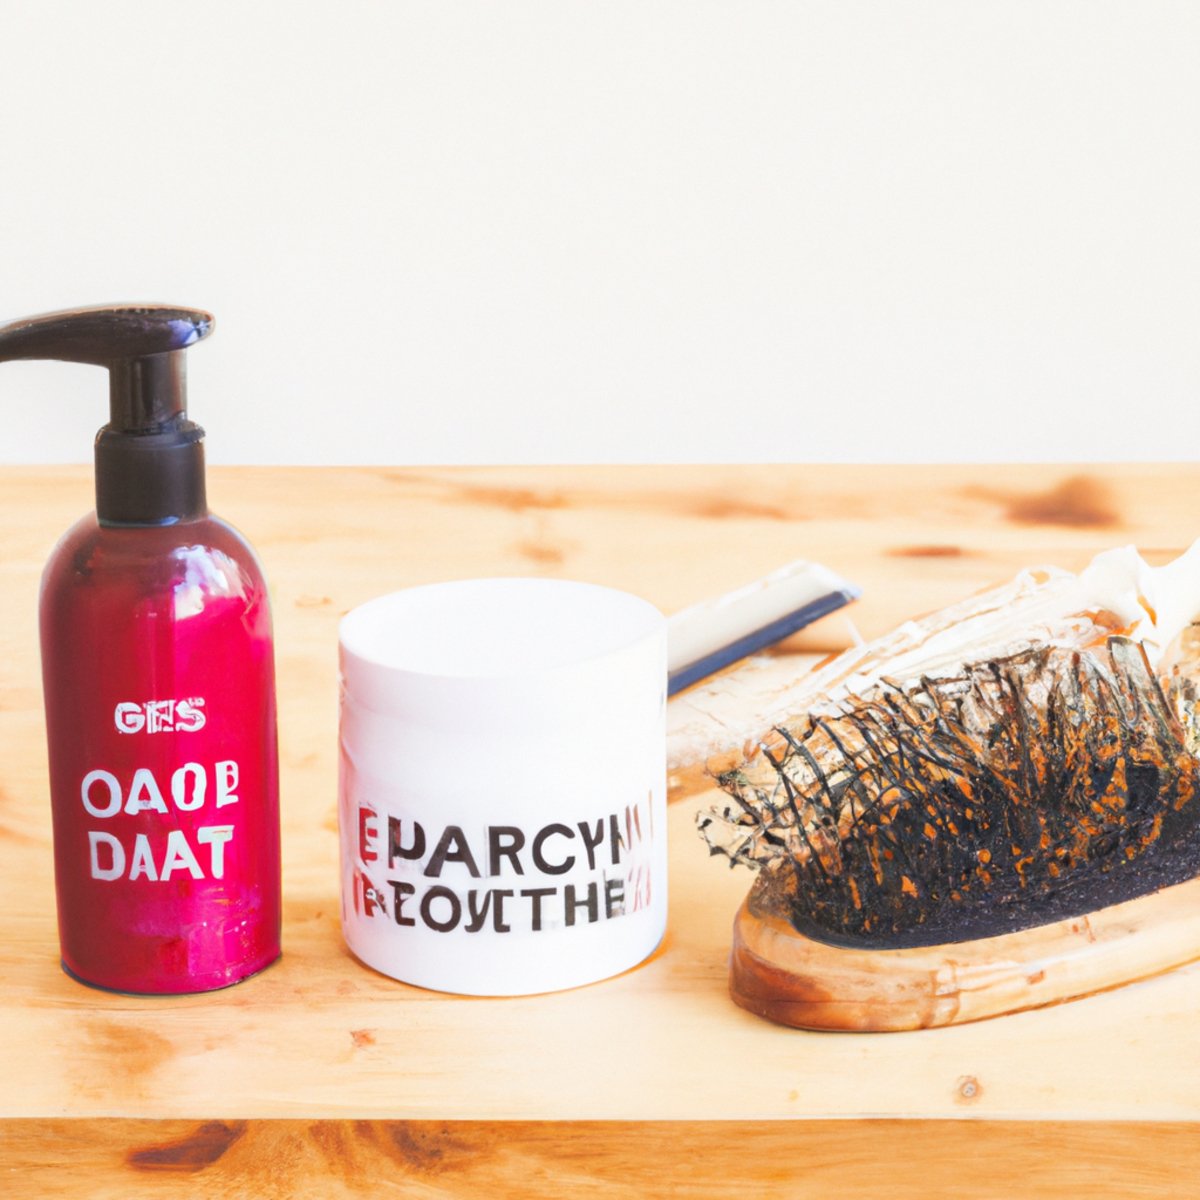 Hair care products arranged on wooden table with focus on deep conditioning treatment for damaged hair.